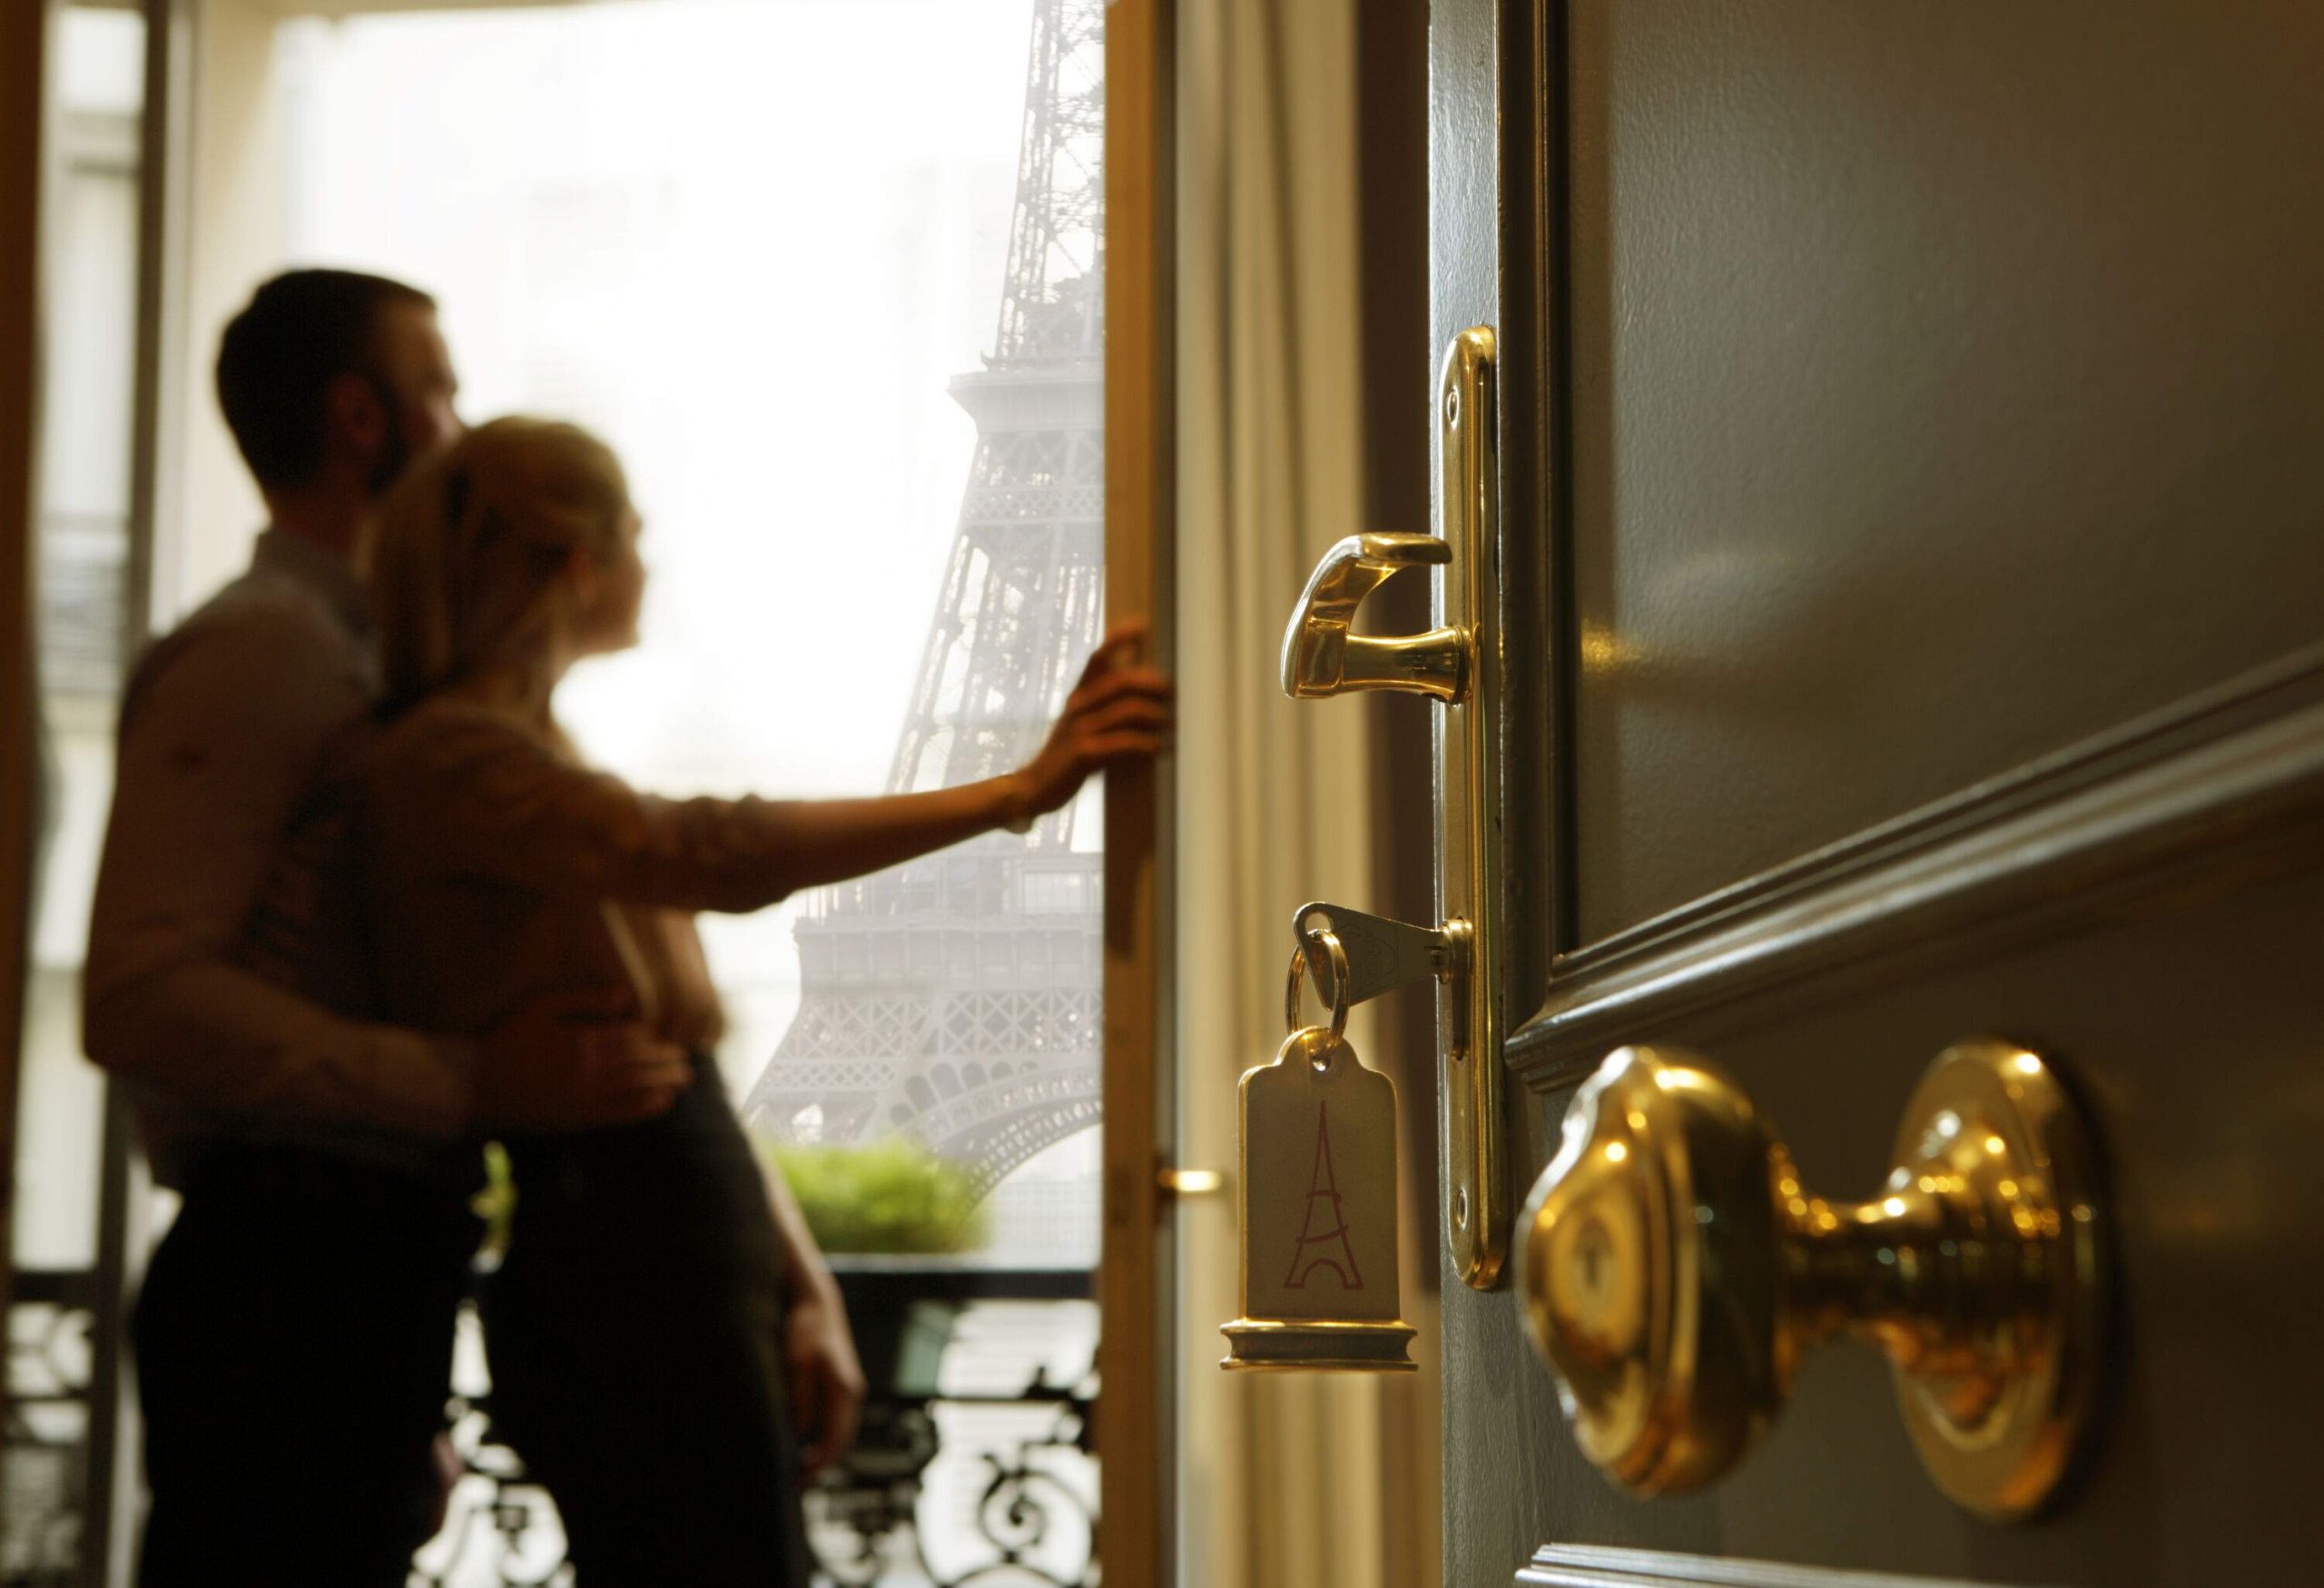 A couple on a glass window of a hotel room viewing the Eiffel tower.